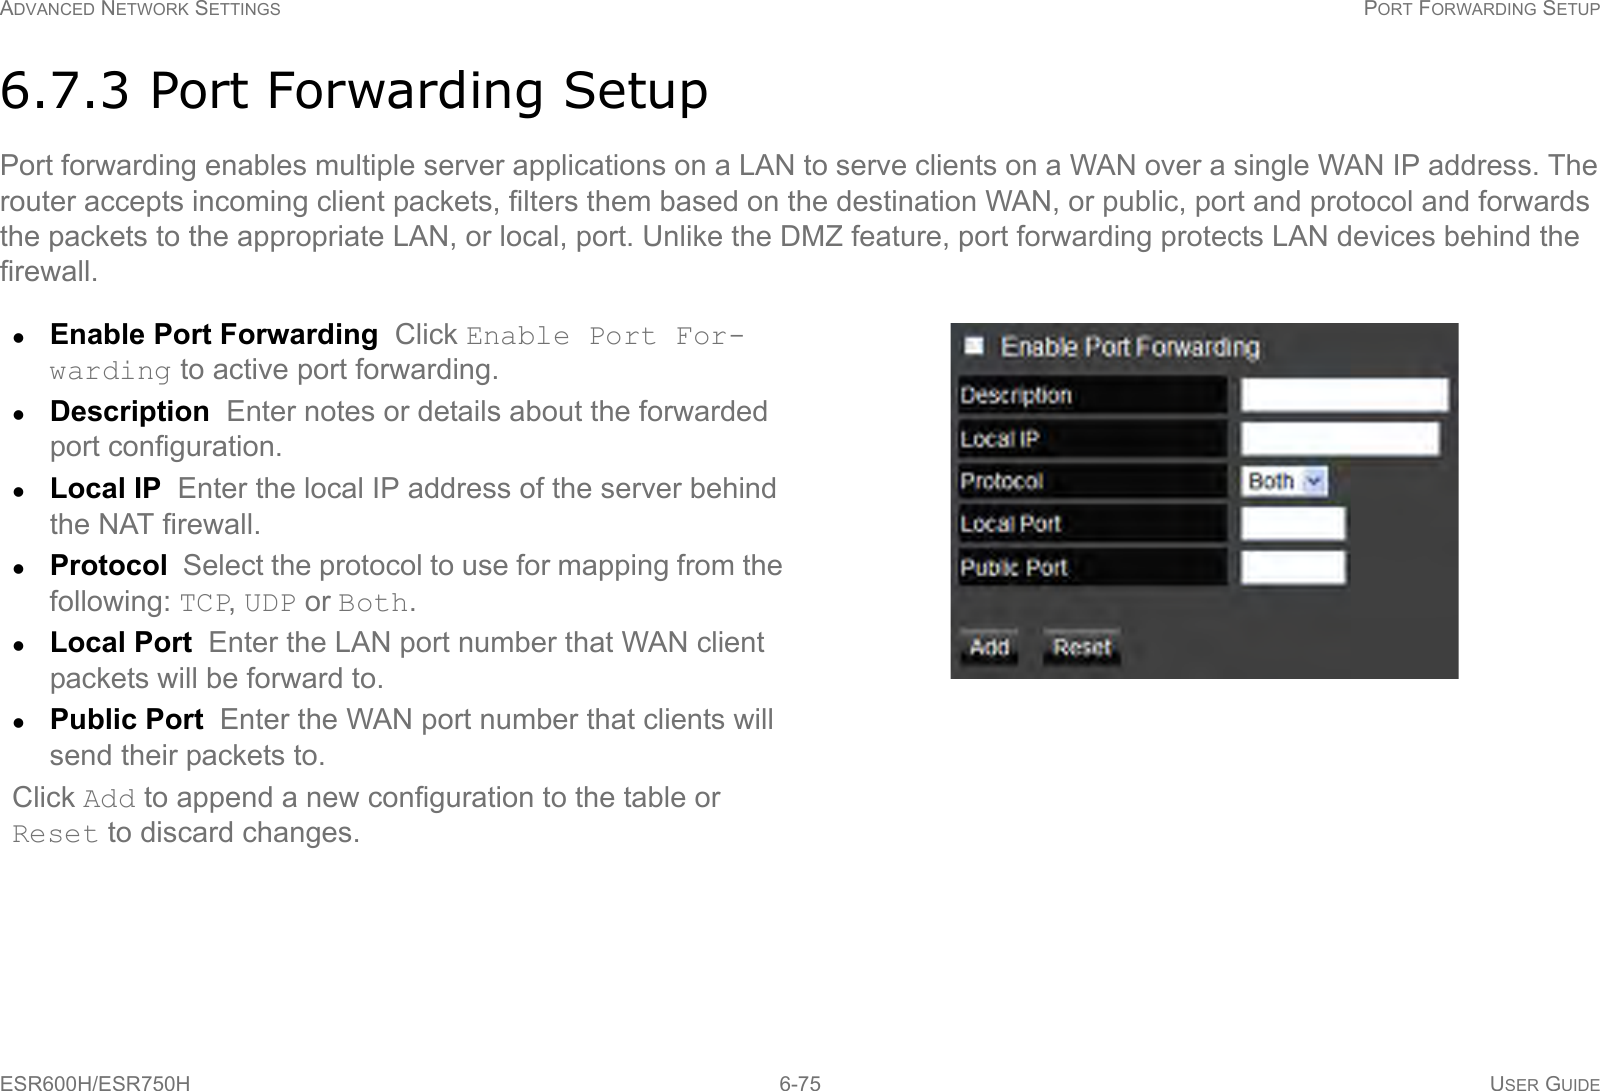 ADVANCED NETWORK SETTINGS PORT FORWARDING SETUPESR600H/ESR750H 6-75 USER GUIDE6.7.3 Port Forwarding SetupPort forwarding enables multiple server applications on a LAN to serve clients on a WAN over a single WAN IP address. The router accepts incoming client packets, filters them based on the destination WAN, or public, port and protocol and forwards the packets to the appropriate LAN, or local, port. Unlike the DMZ feature, port forwarding protects LAN devices behind the firewall.Enable Port Forwarding  Click Enable Port For-warding to active port forwarding.Description  Enter notes or details about the forwarded port configuration.Local IP  Enter the local IP address of the server behind the NAT firewall.Protocol  Select the protocol to use for mapping from the following: TCP, UDP or Both.Local Port  Enter the LAN port number that WAN client packets will be forward to.Public Port  Enter the WAN port number that clients will send their packets to.Click Add to append a new configuration to the table or Reset to discard changes.